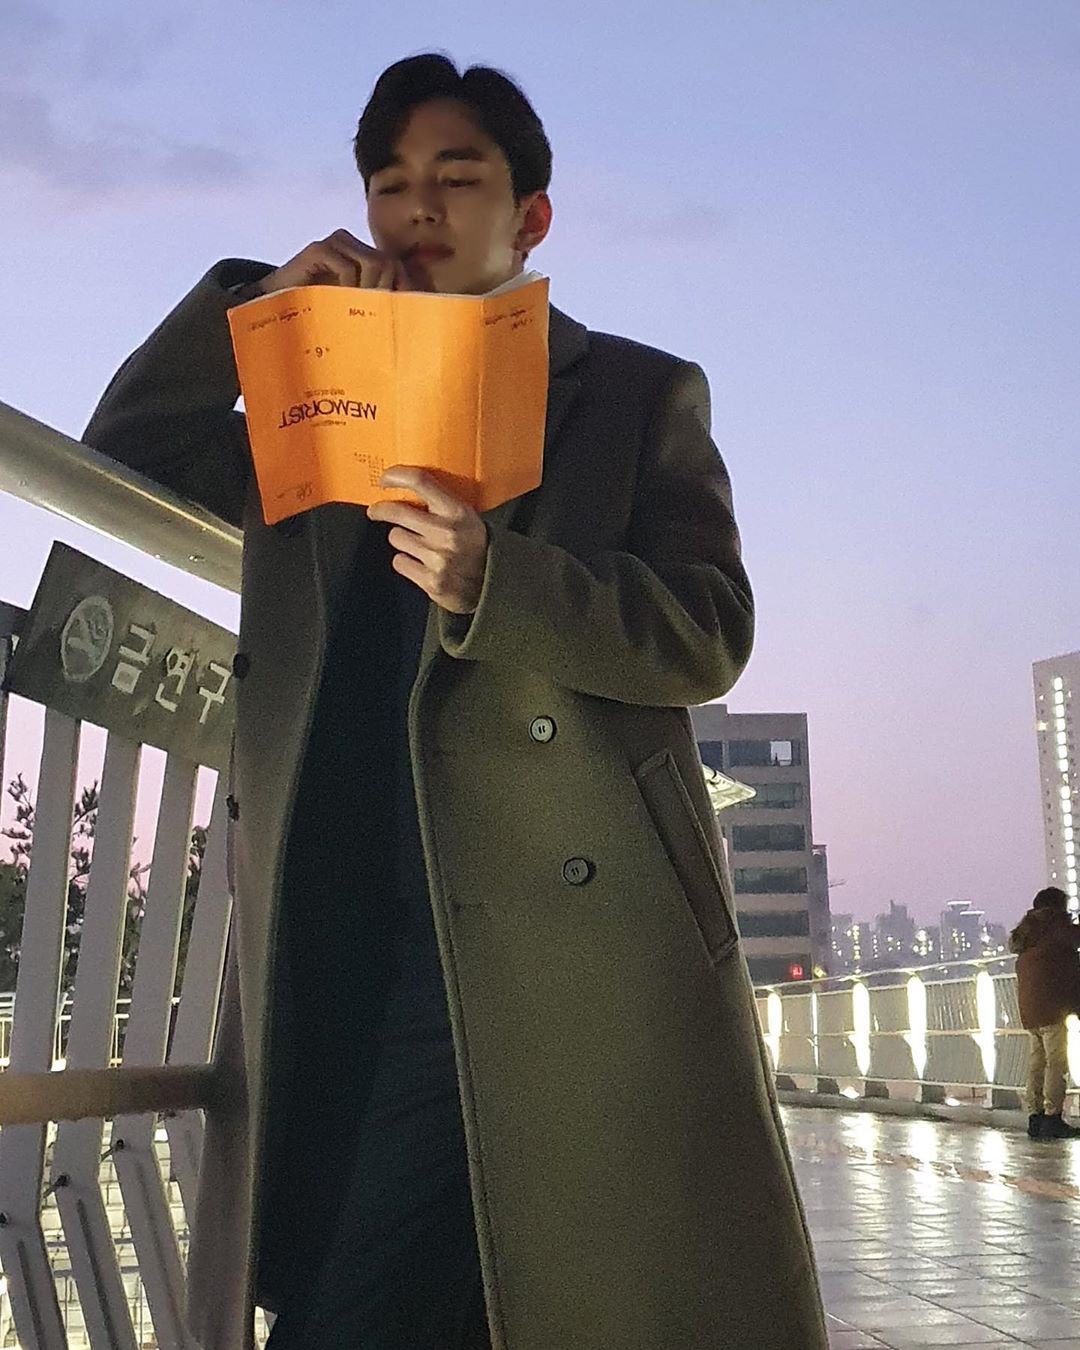 Actor Yoo Seung-ho boasts a professional appearance ahead of the first broadcast of Memoir of Warlist.On the 10th, Yoo Seung-ho posted several photos on his Instagram.In the photo, Yoo Seung-ho is in the process of reading with a new TVN drama Memoir of Warlist script in his hand.But I was so immersed with the script upside down that I laughed.I cant slow down the D-1, said Yoo Seung-ho, adding, I never let go of the script in my hand, this is the true PRO.Meanwhile, Memoir of Warlist will be broadcasted at 10:50 pm on the 11th.Photo = Yoo Seung-ho Instagram